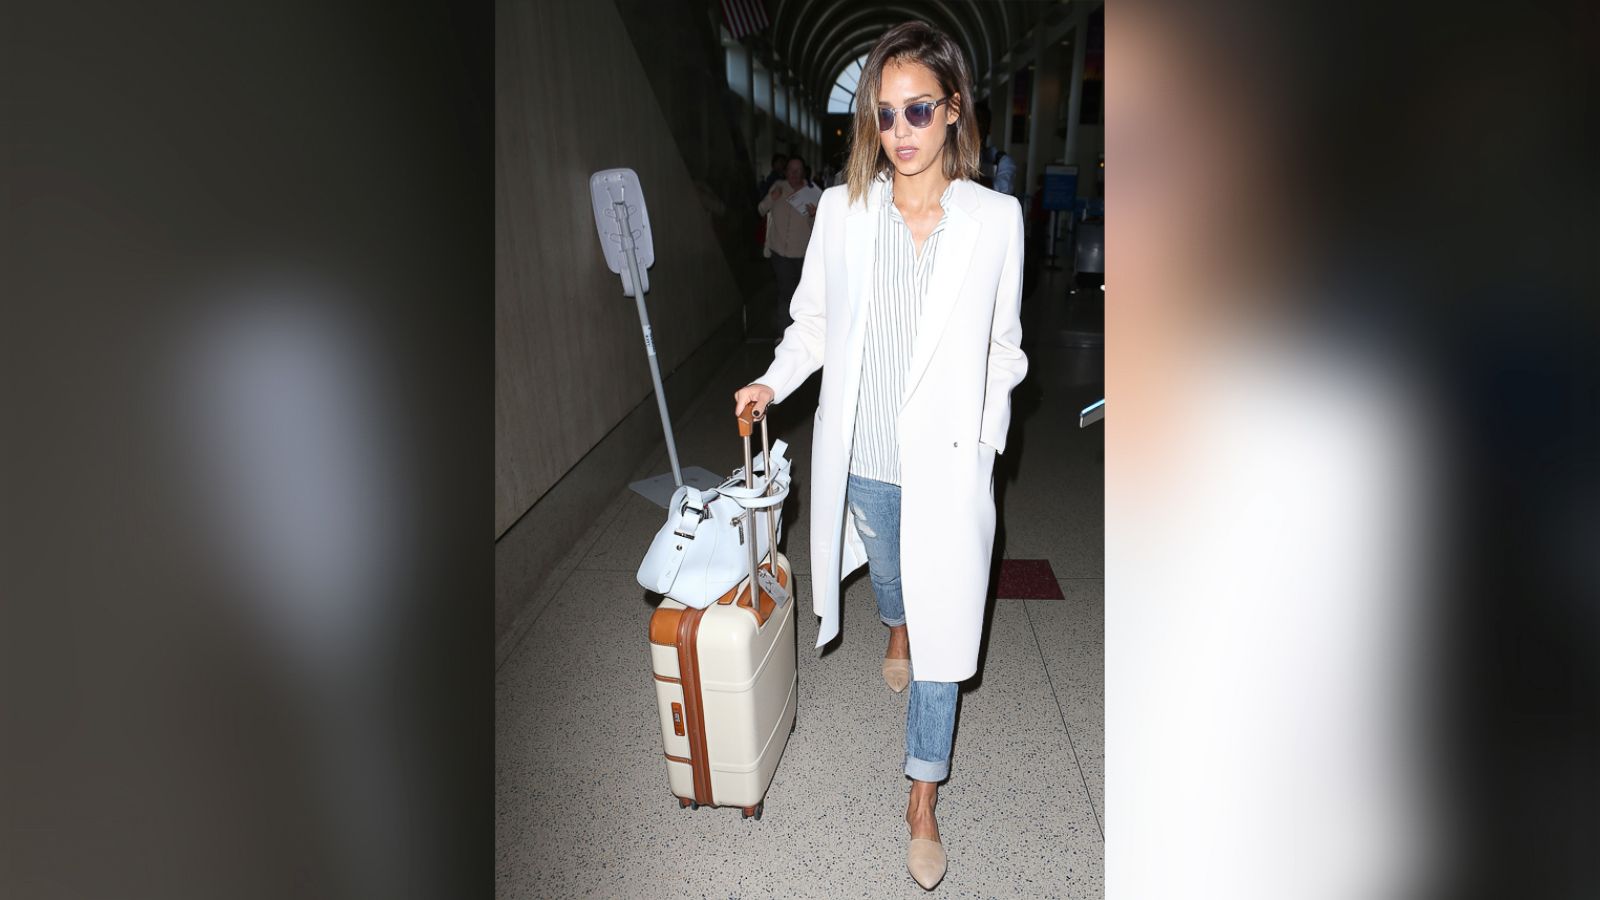 Celebrity Outfit Inspiration: What to Wear to Stay Comfy and Stylish While  Traveling - ABC News